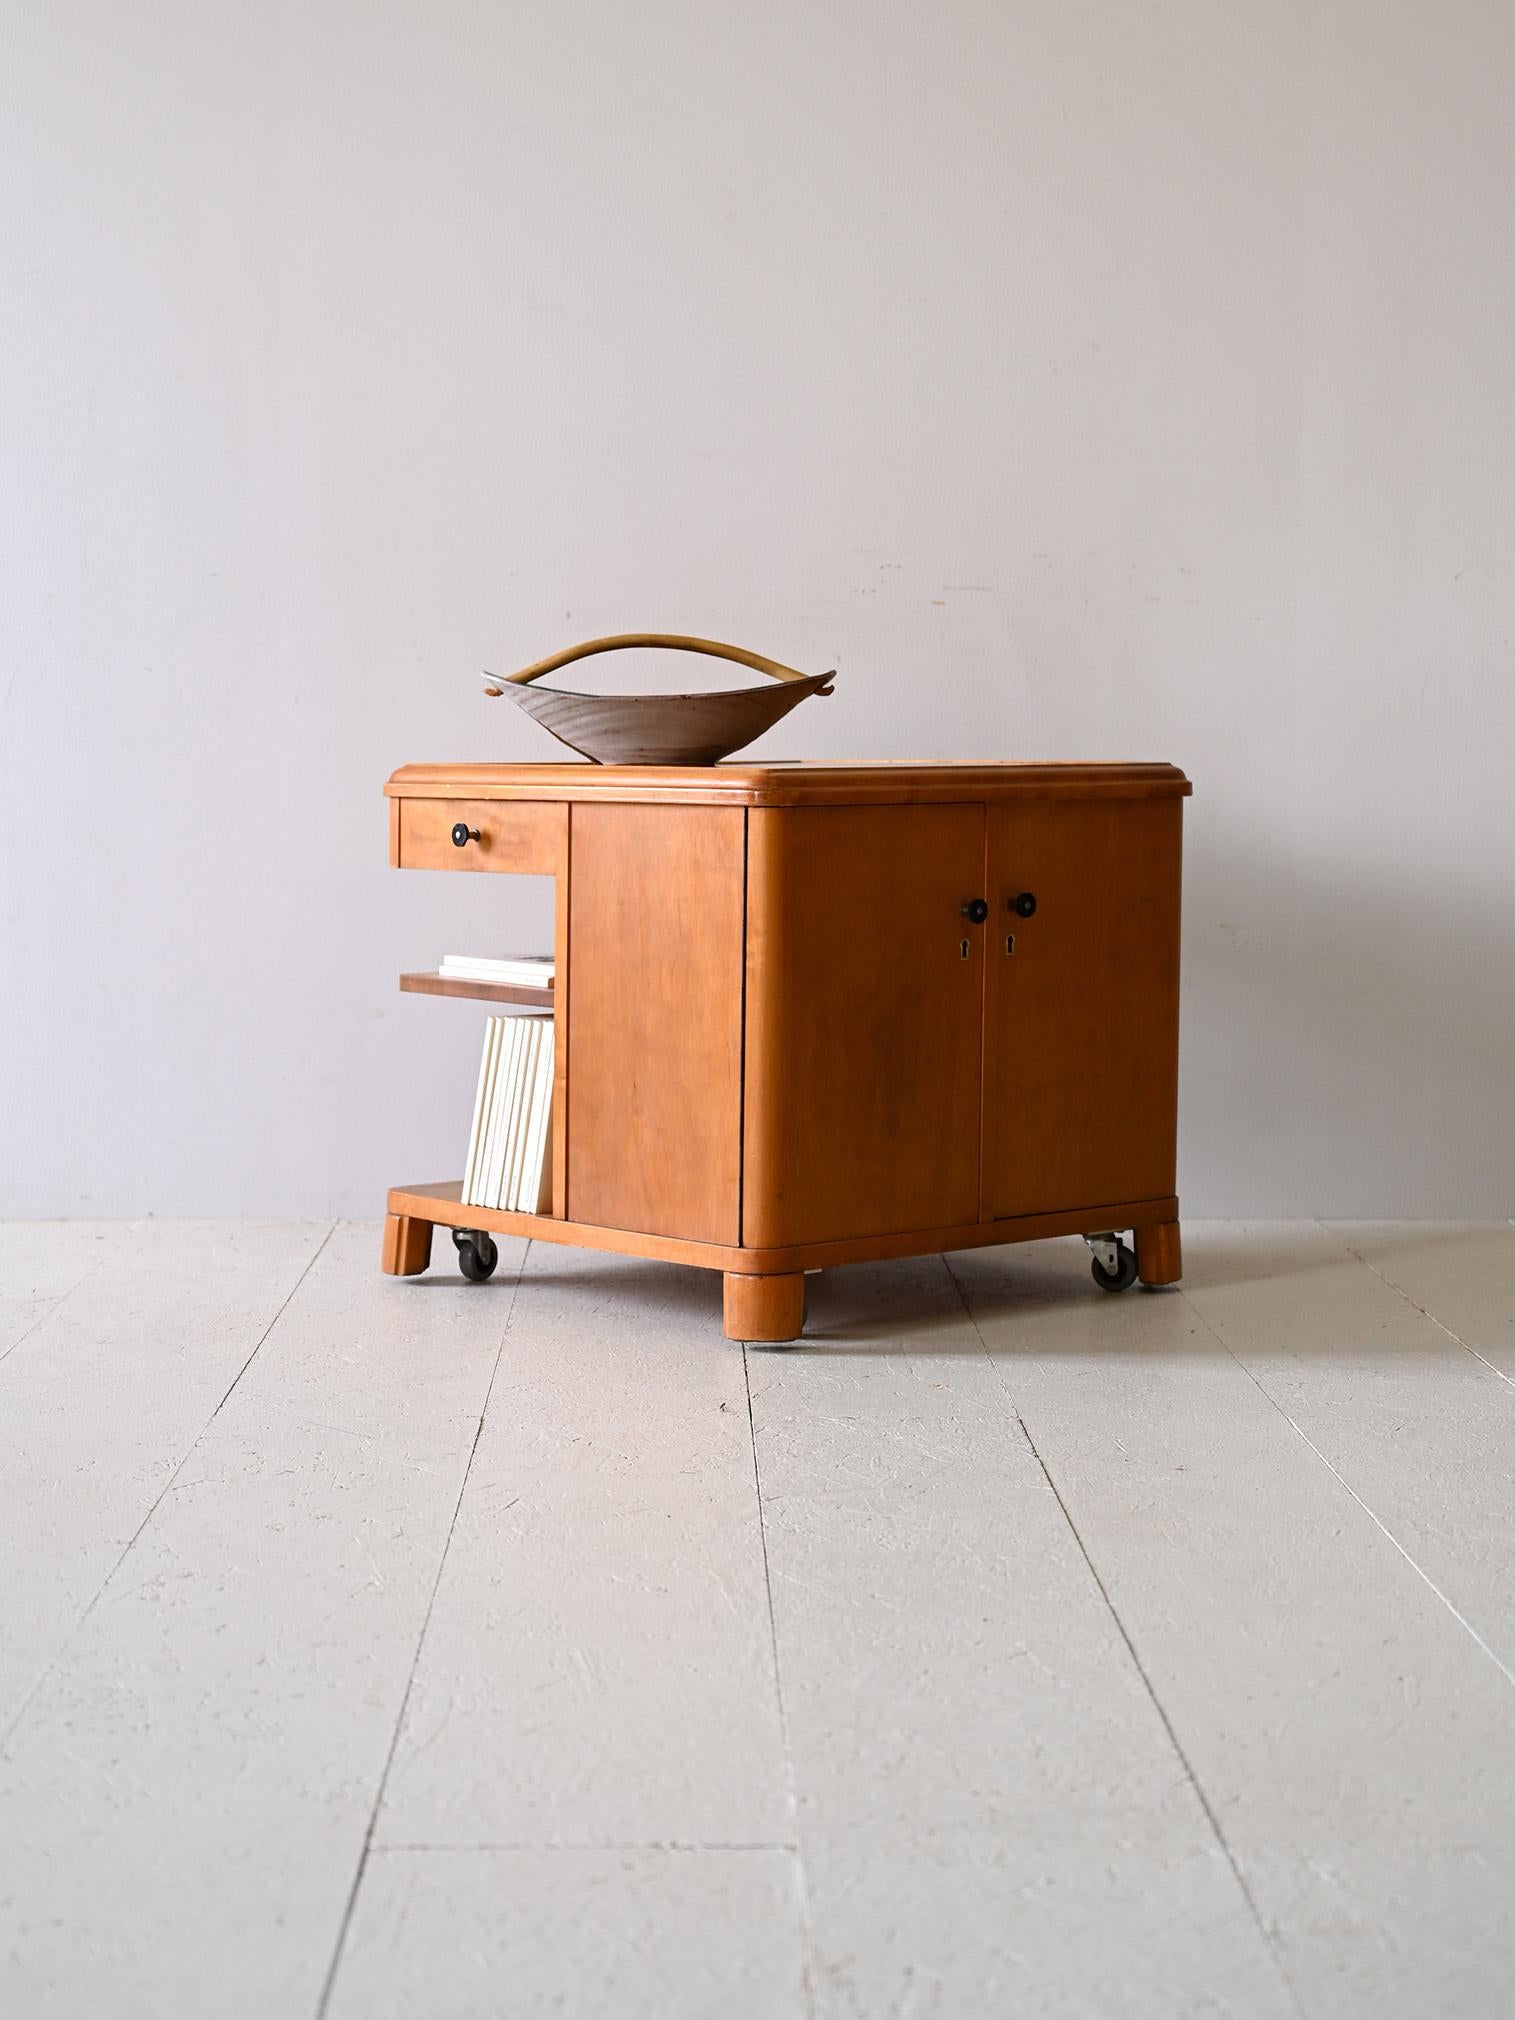 Coffee table with compartments and bookcase produced in Scandinavia in the 1940s.

Original Deco trolley cabinet made of birch wood.
Equipped with lockable hinged doors, a drawer and shelves for organizing books and objects, this trolley cabinet is